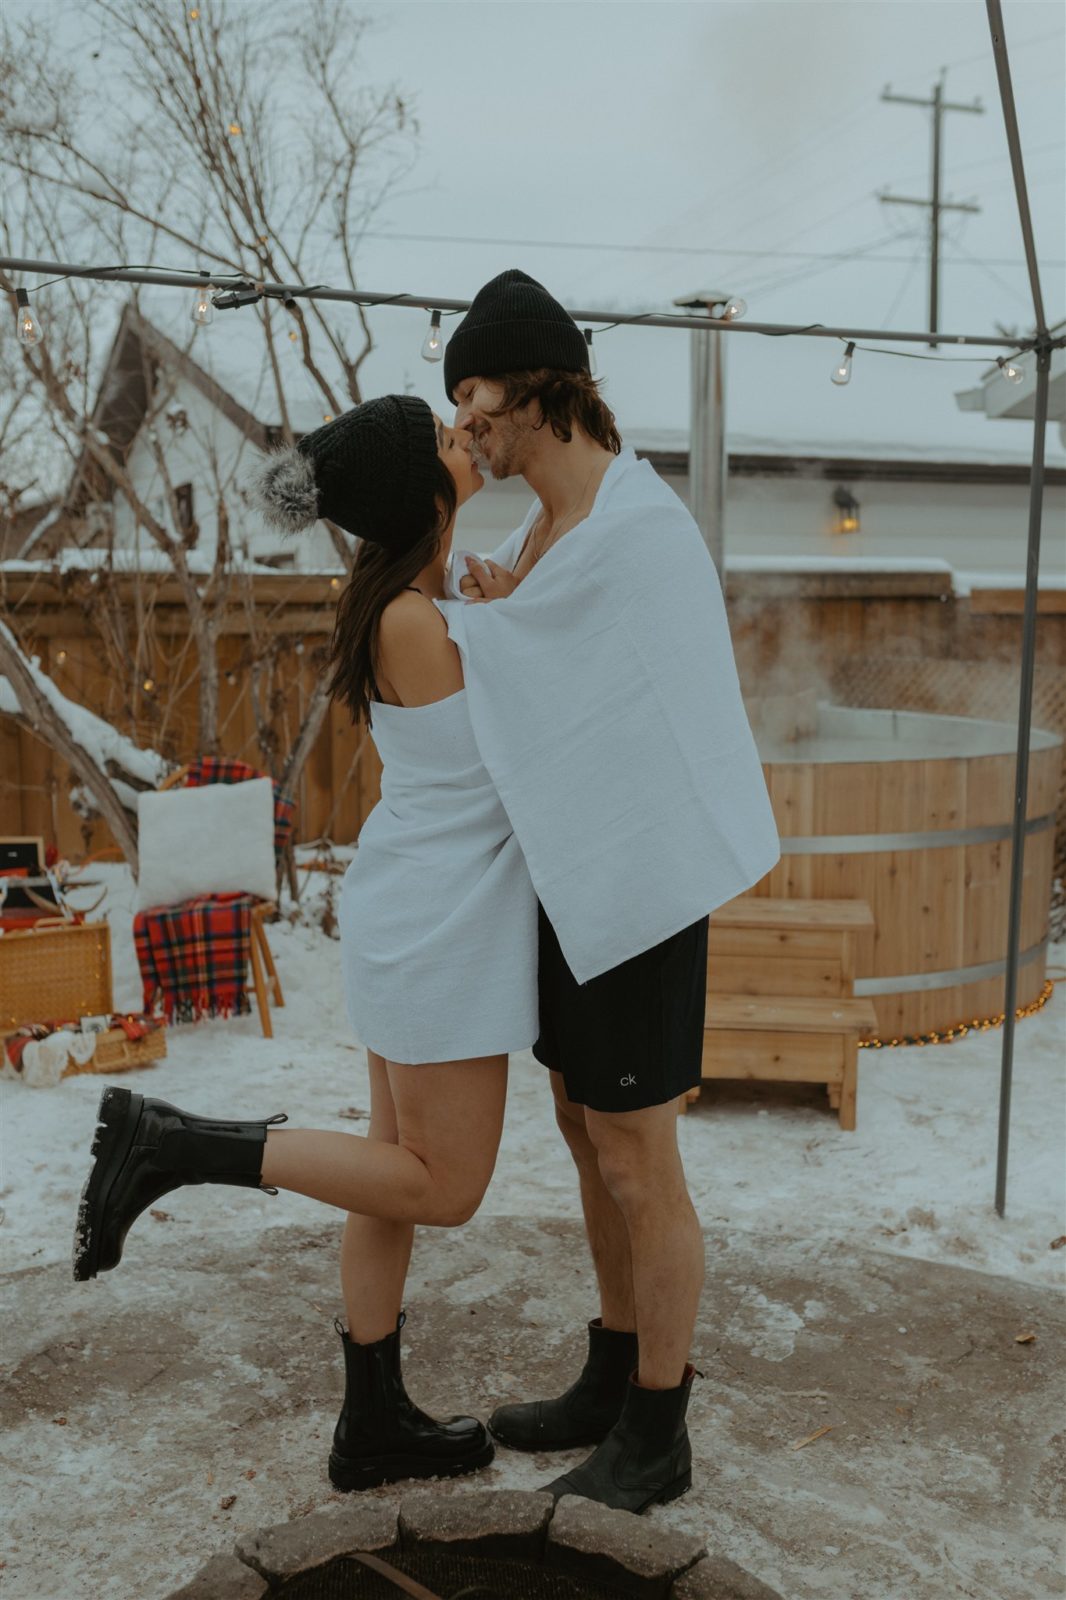 Couple gets ready for unique hot tub engagement session activity during Alberta winter